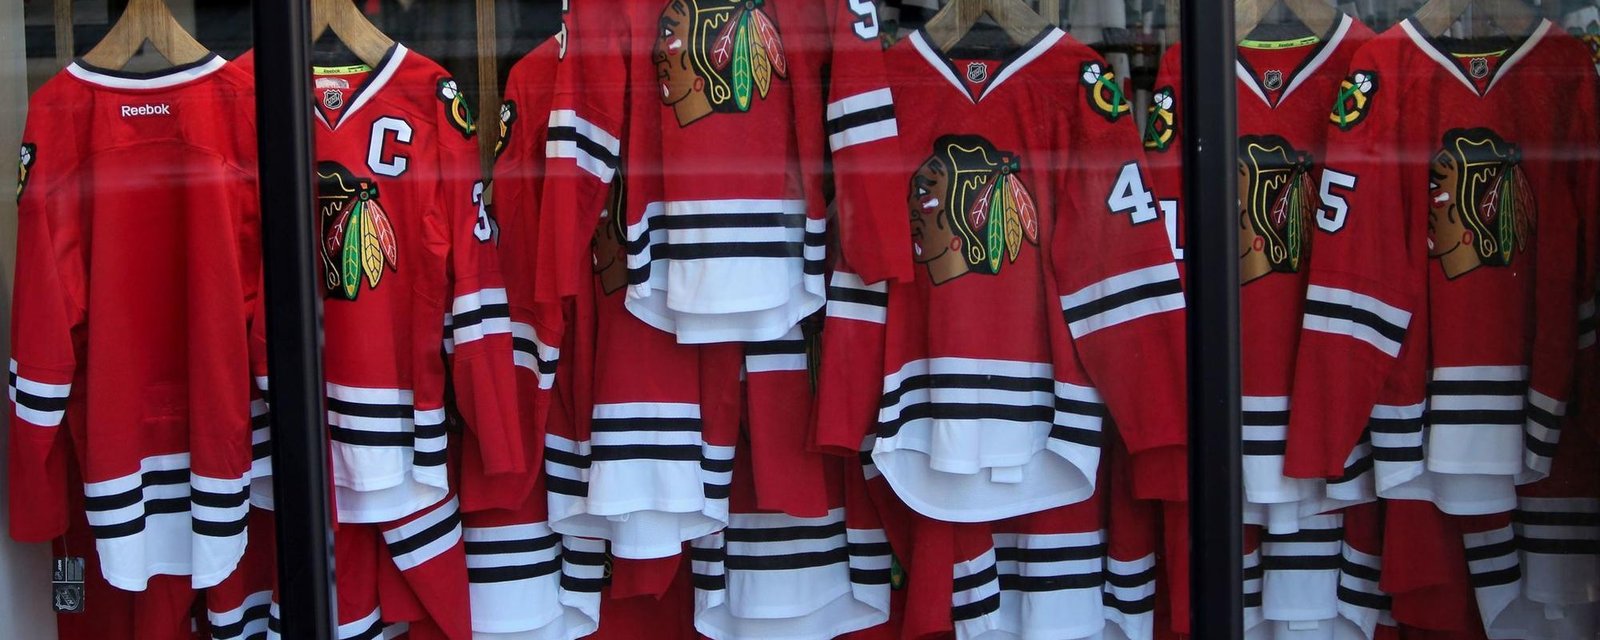 New primary uniforms listed for the Blackhawks in 2019-20! 